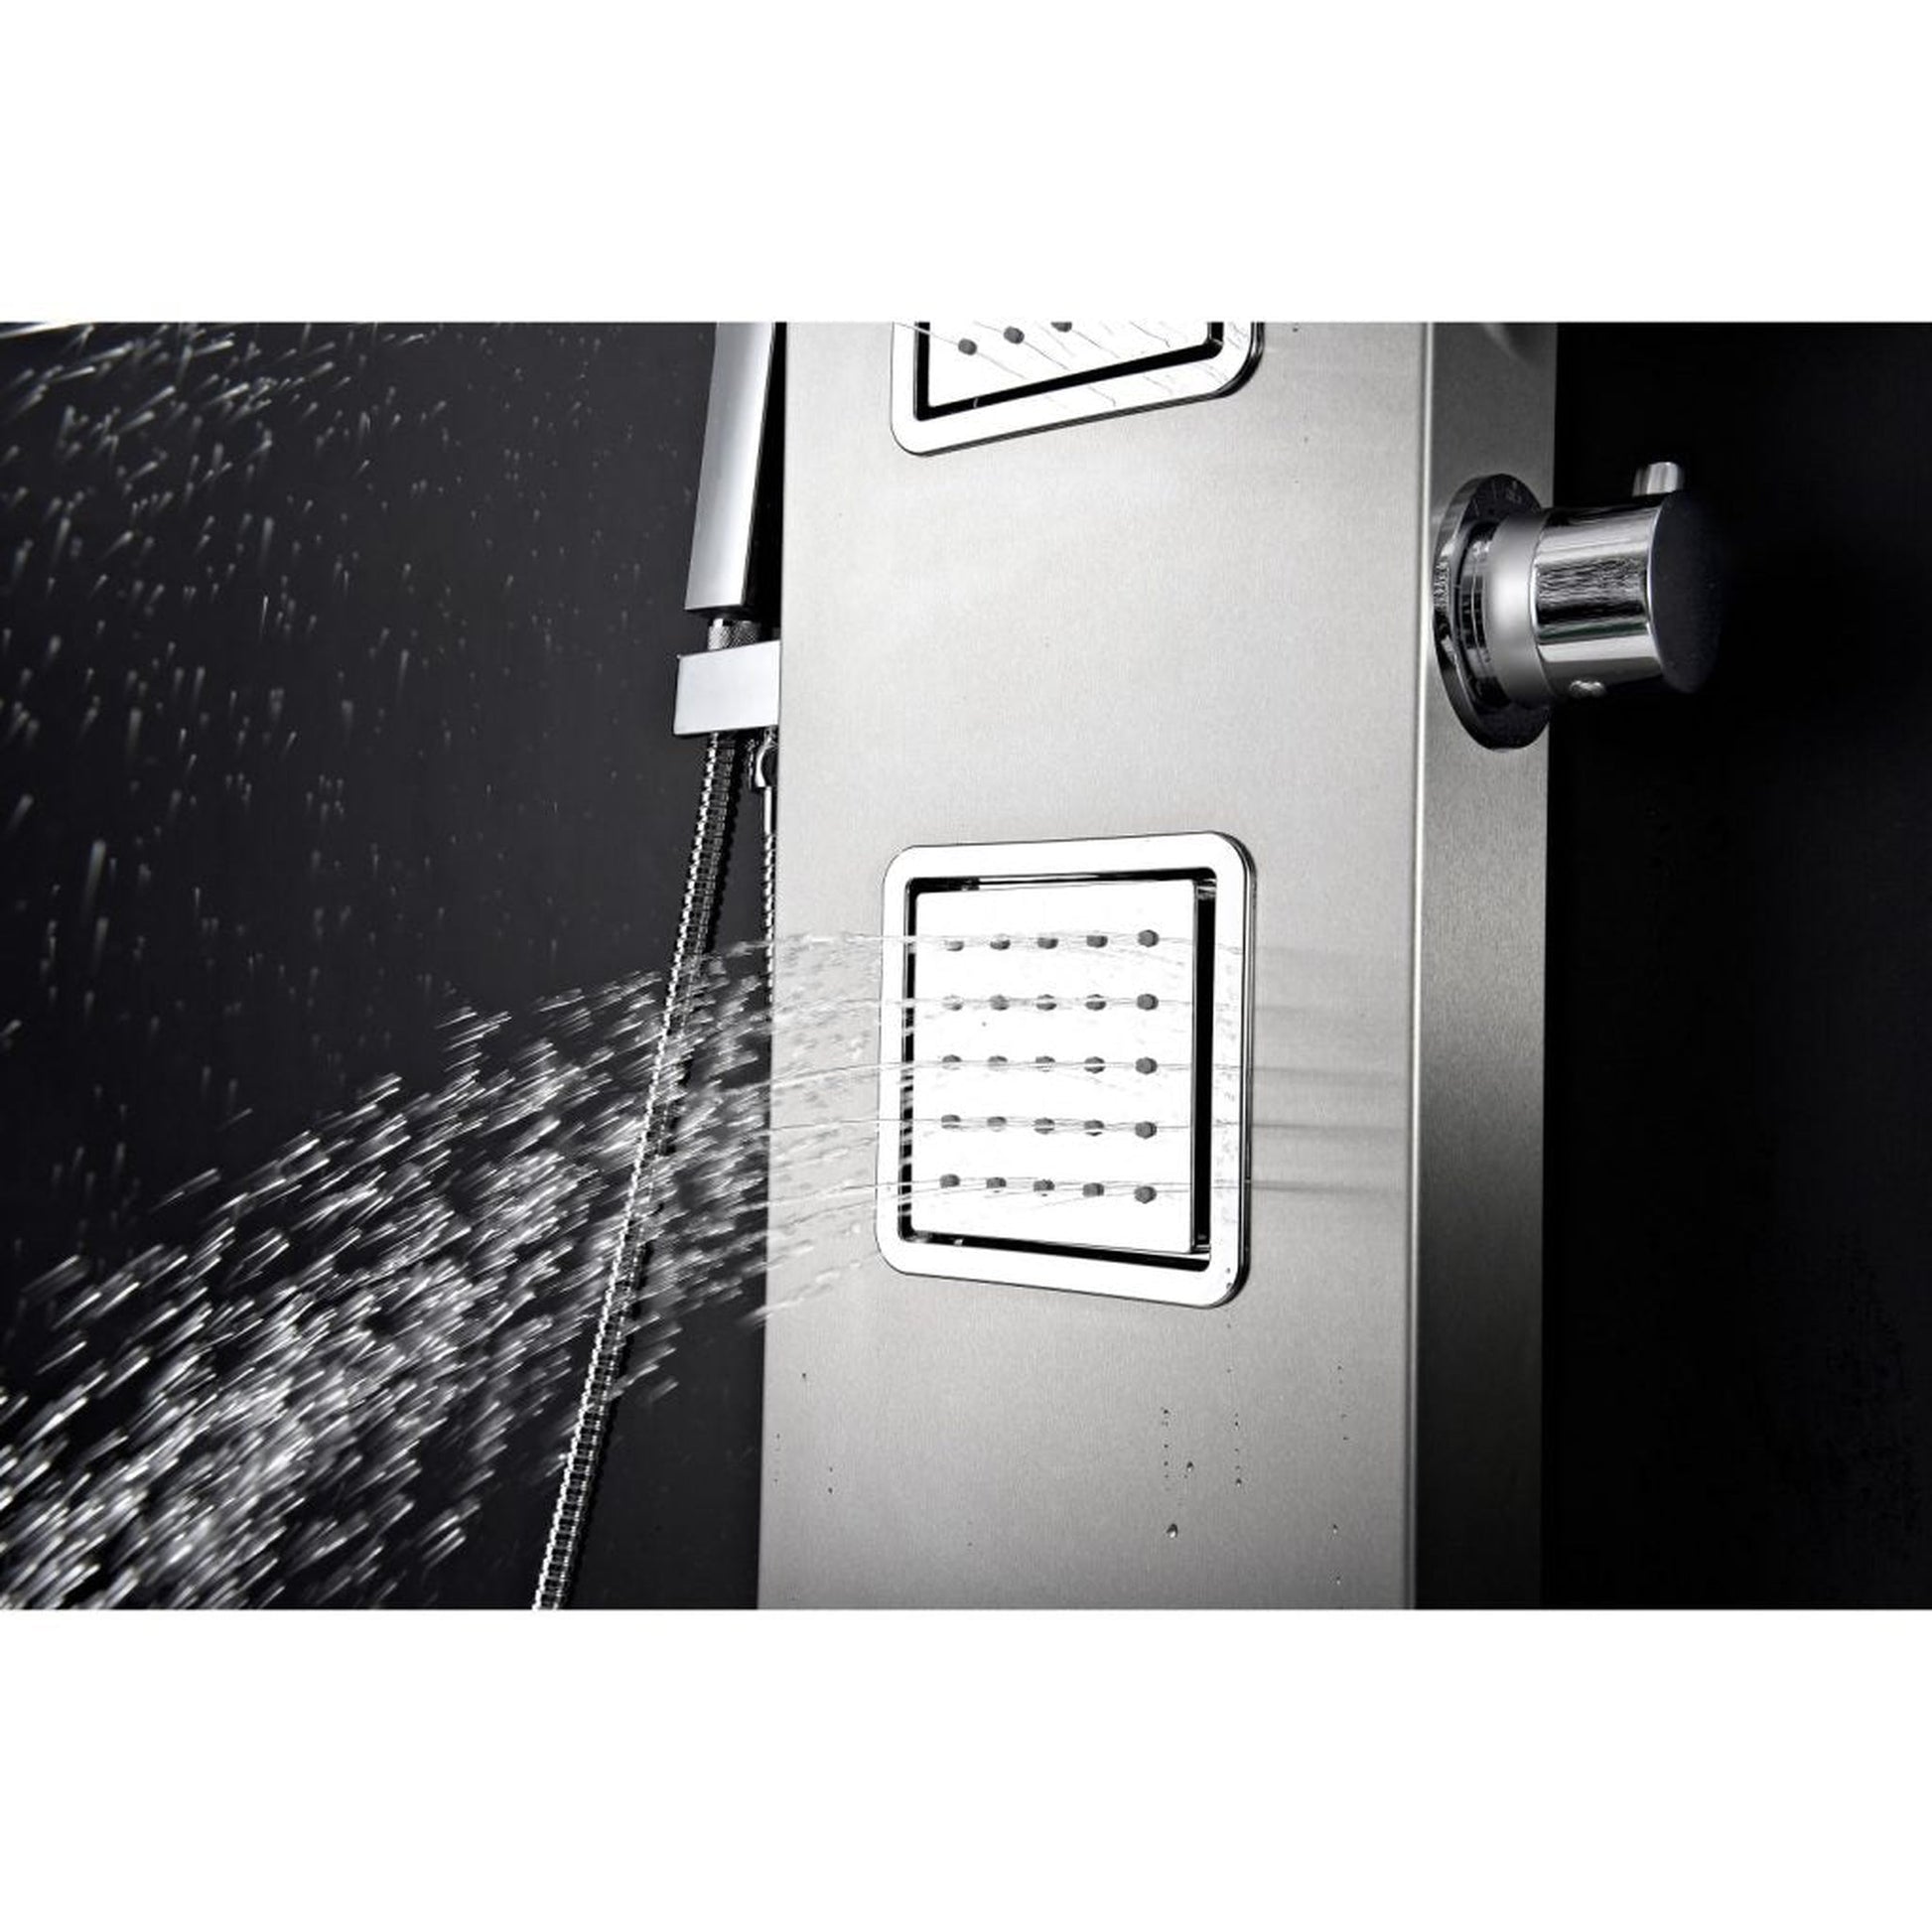 ANZZI Mesa Series 64" Brushed Stainless Steel 4-Jetted Full Body Shower Panel With Heavy Rain Shower Head and Euro-Grip Hand Sprayer